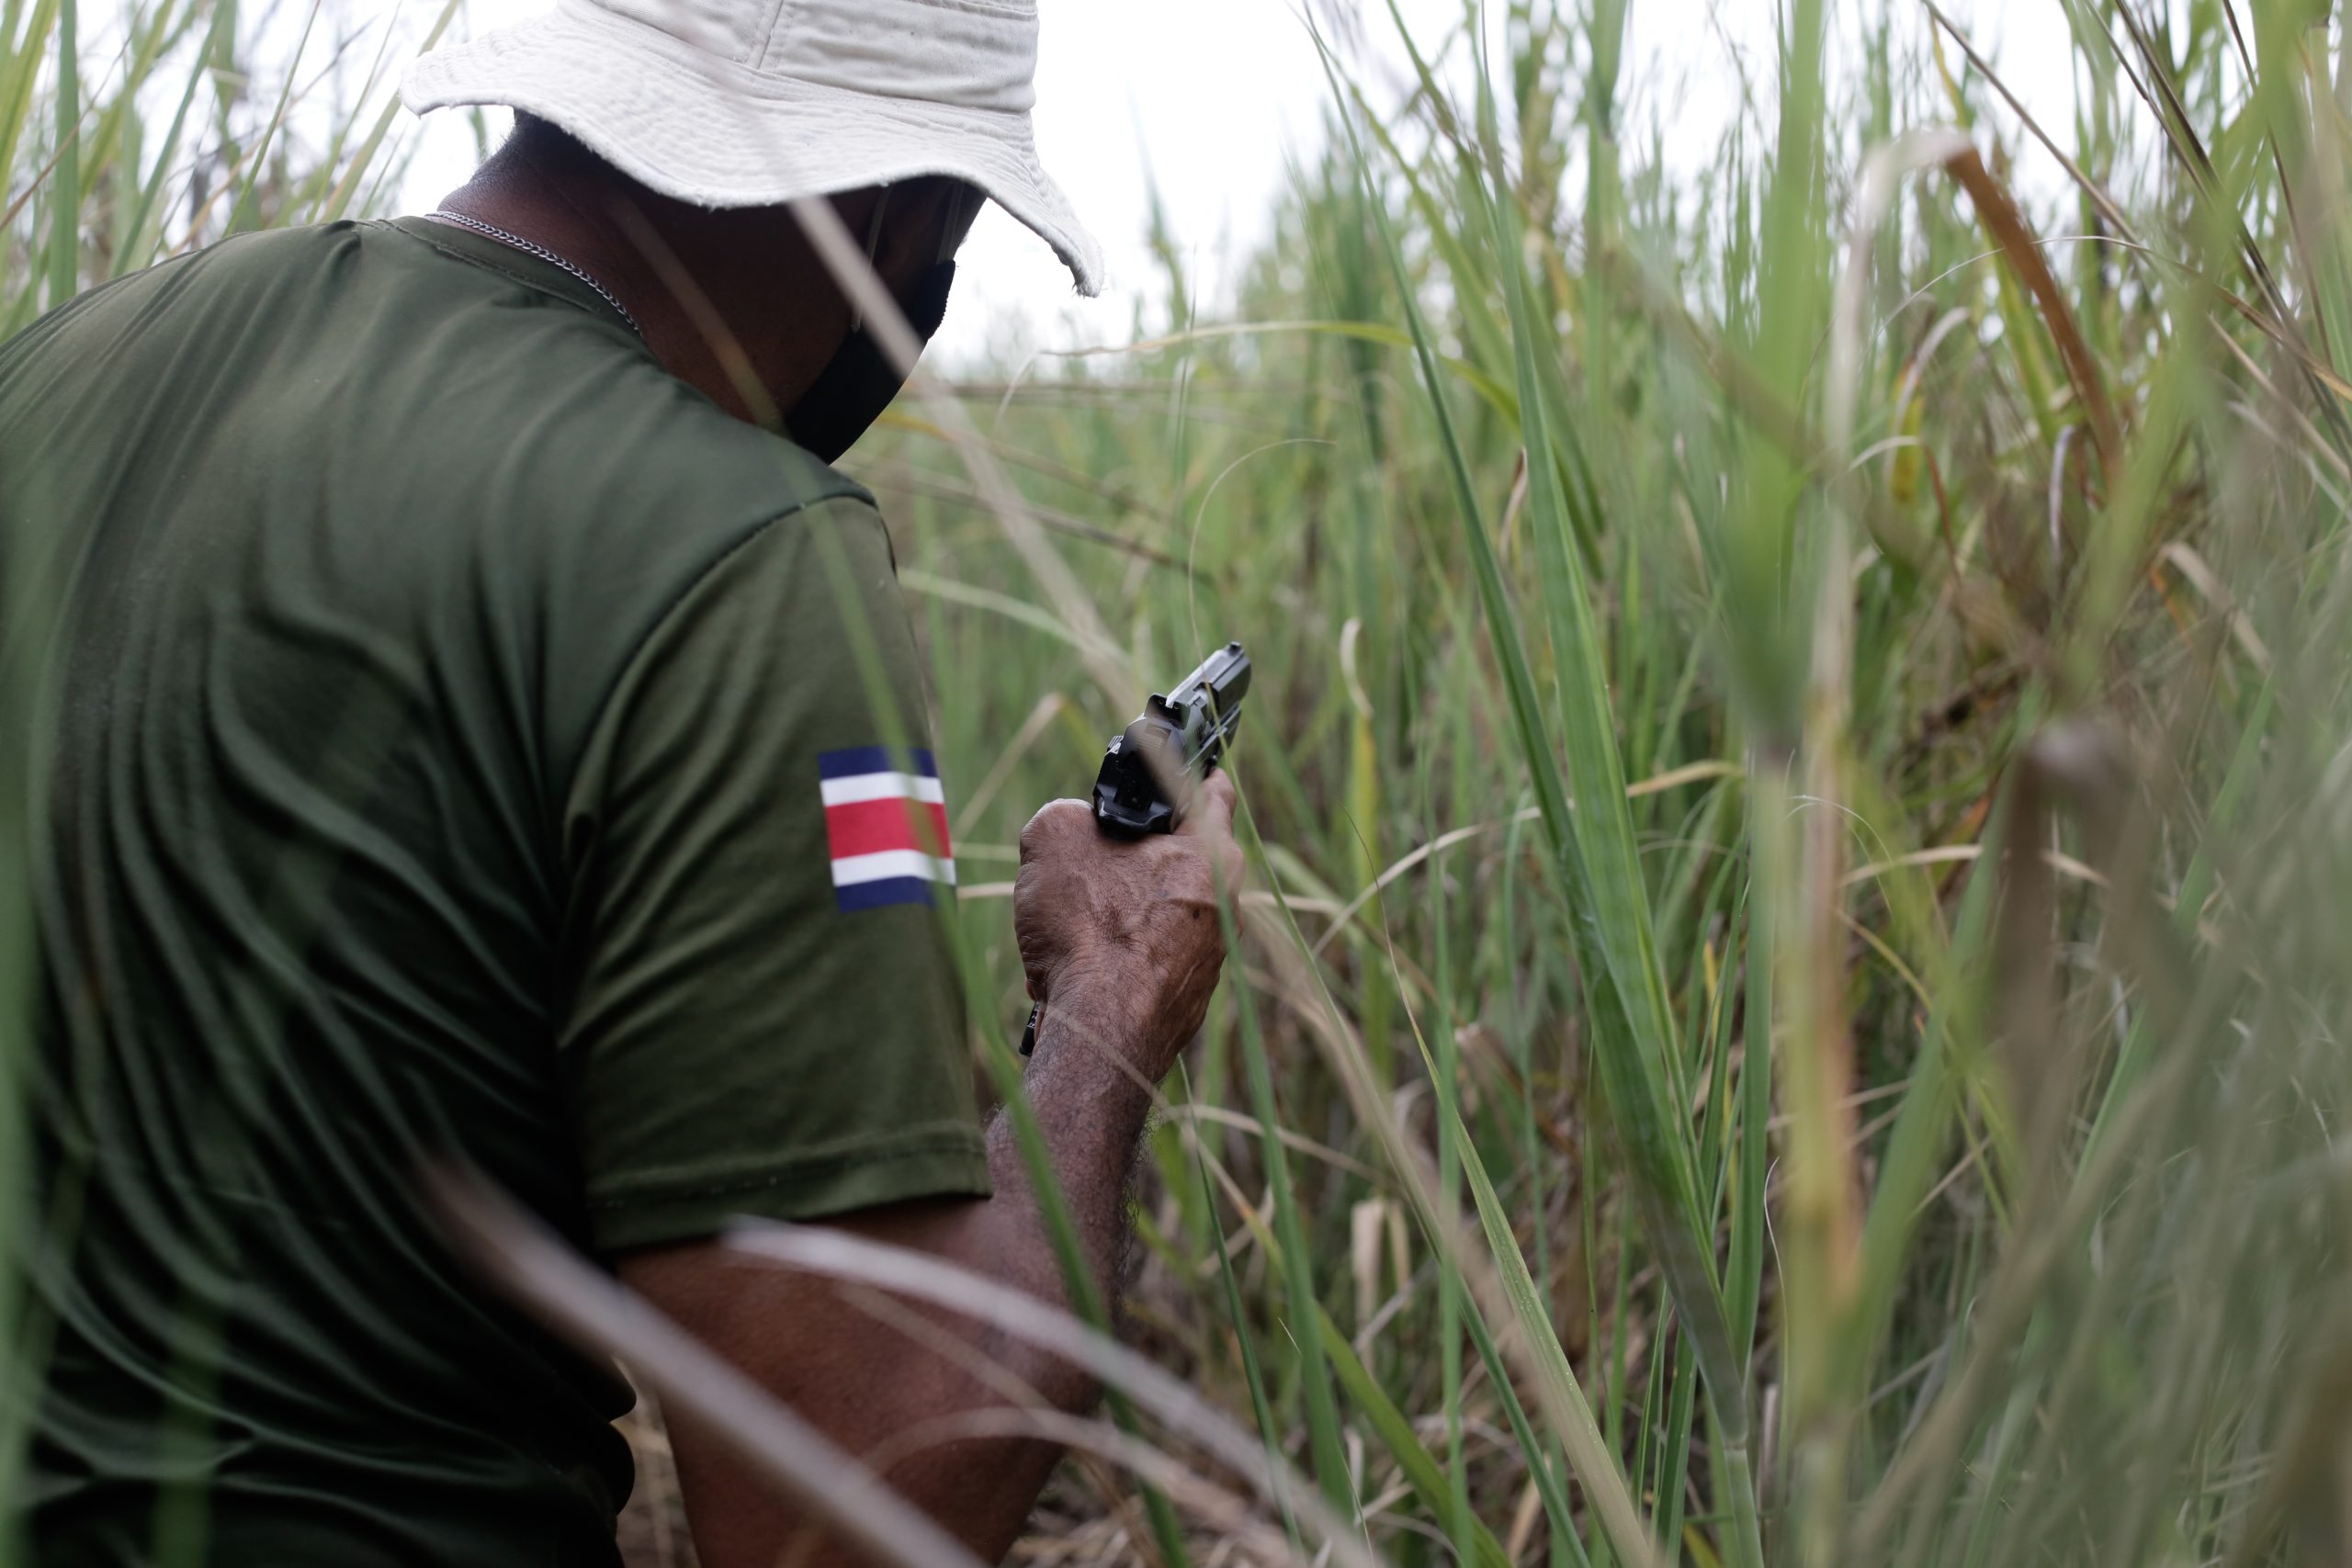 Gelberth Obando armed inspecting one of the illegal entries to the Camaronal National Wildlife Refuge